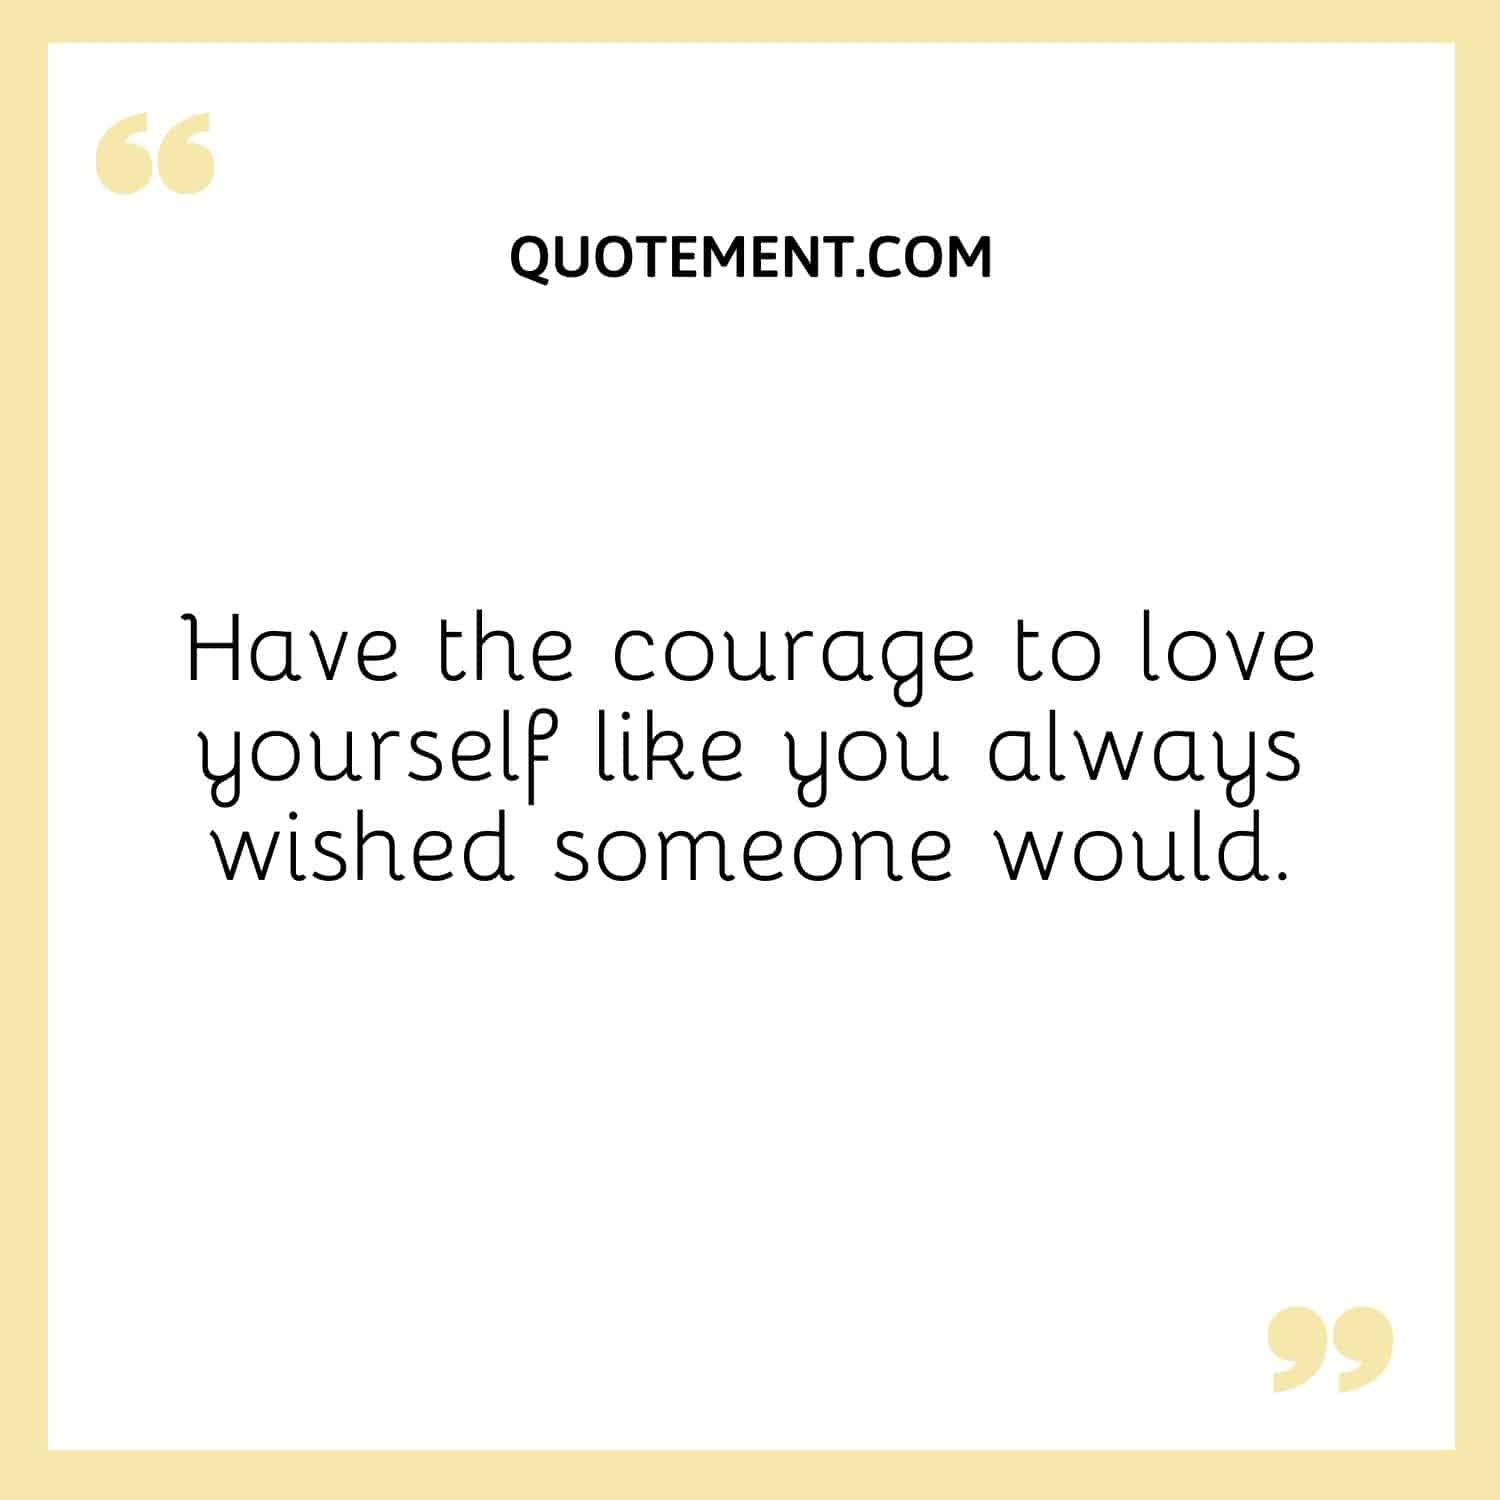 Have the courage to love yourself like you always wished someone would